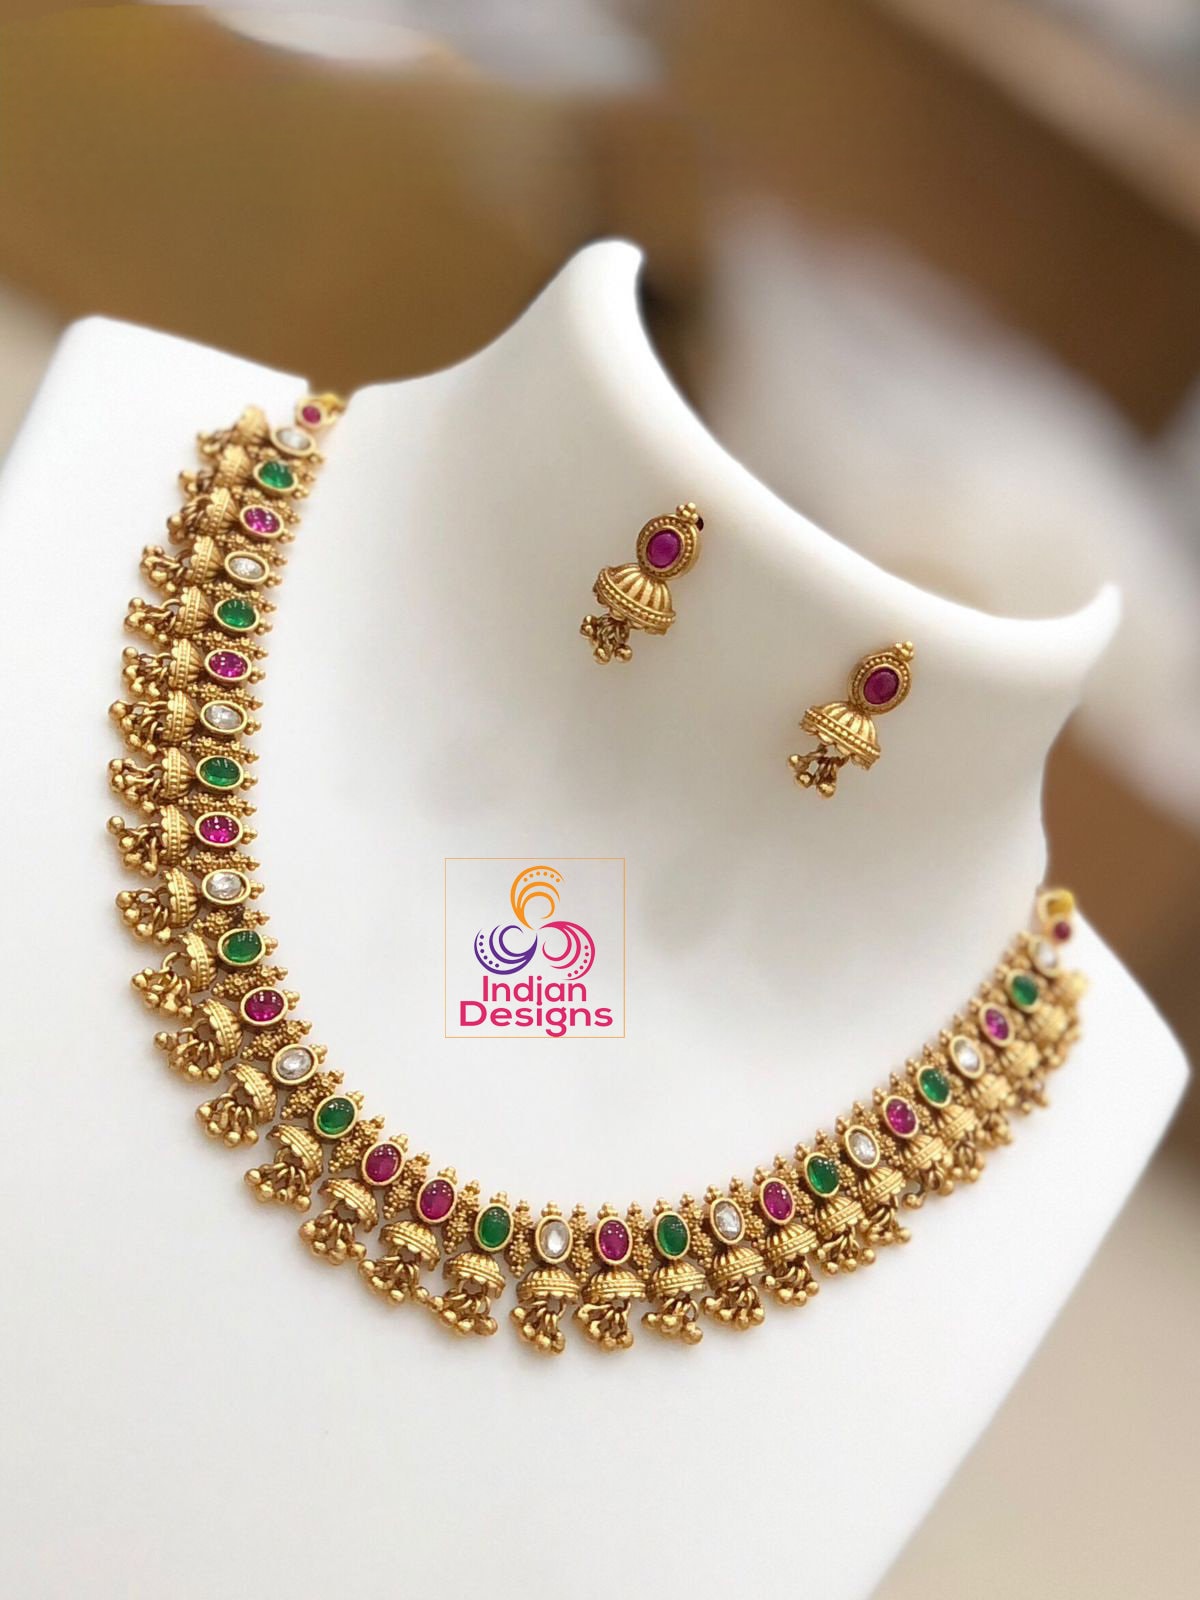 Traditional Matte Gold choker Necklace and small Jhumka Earrings Set |Indian Designs |Ethnic Indian Bridal Wedding Jewelry Set |Gift for her